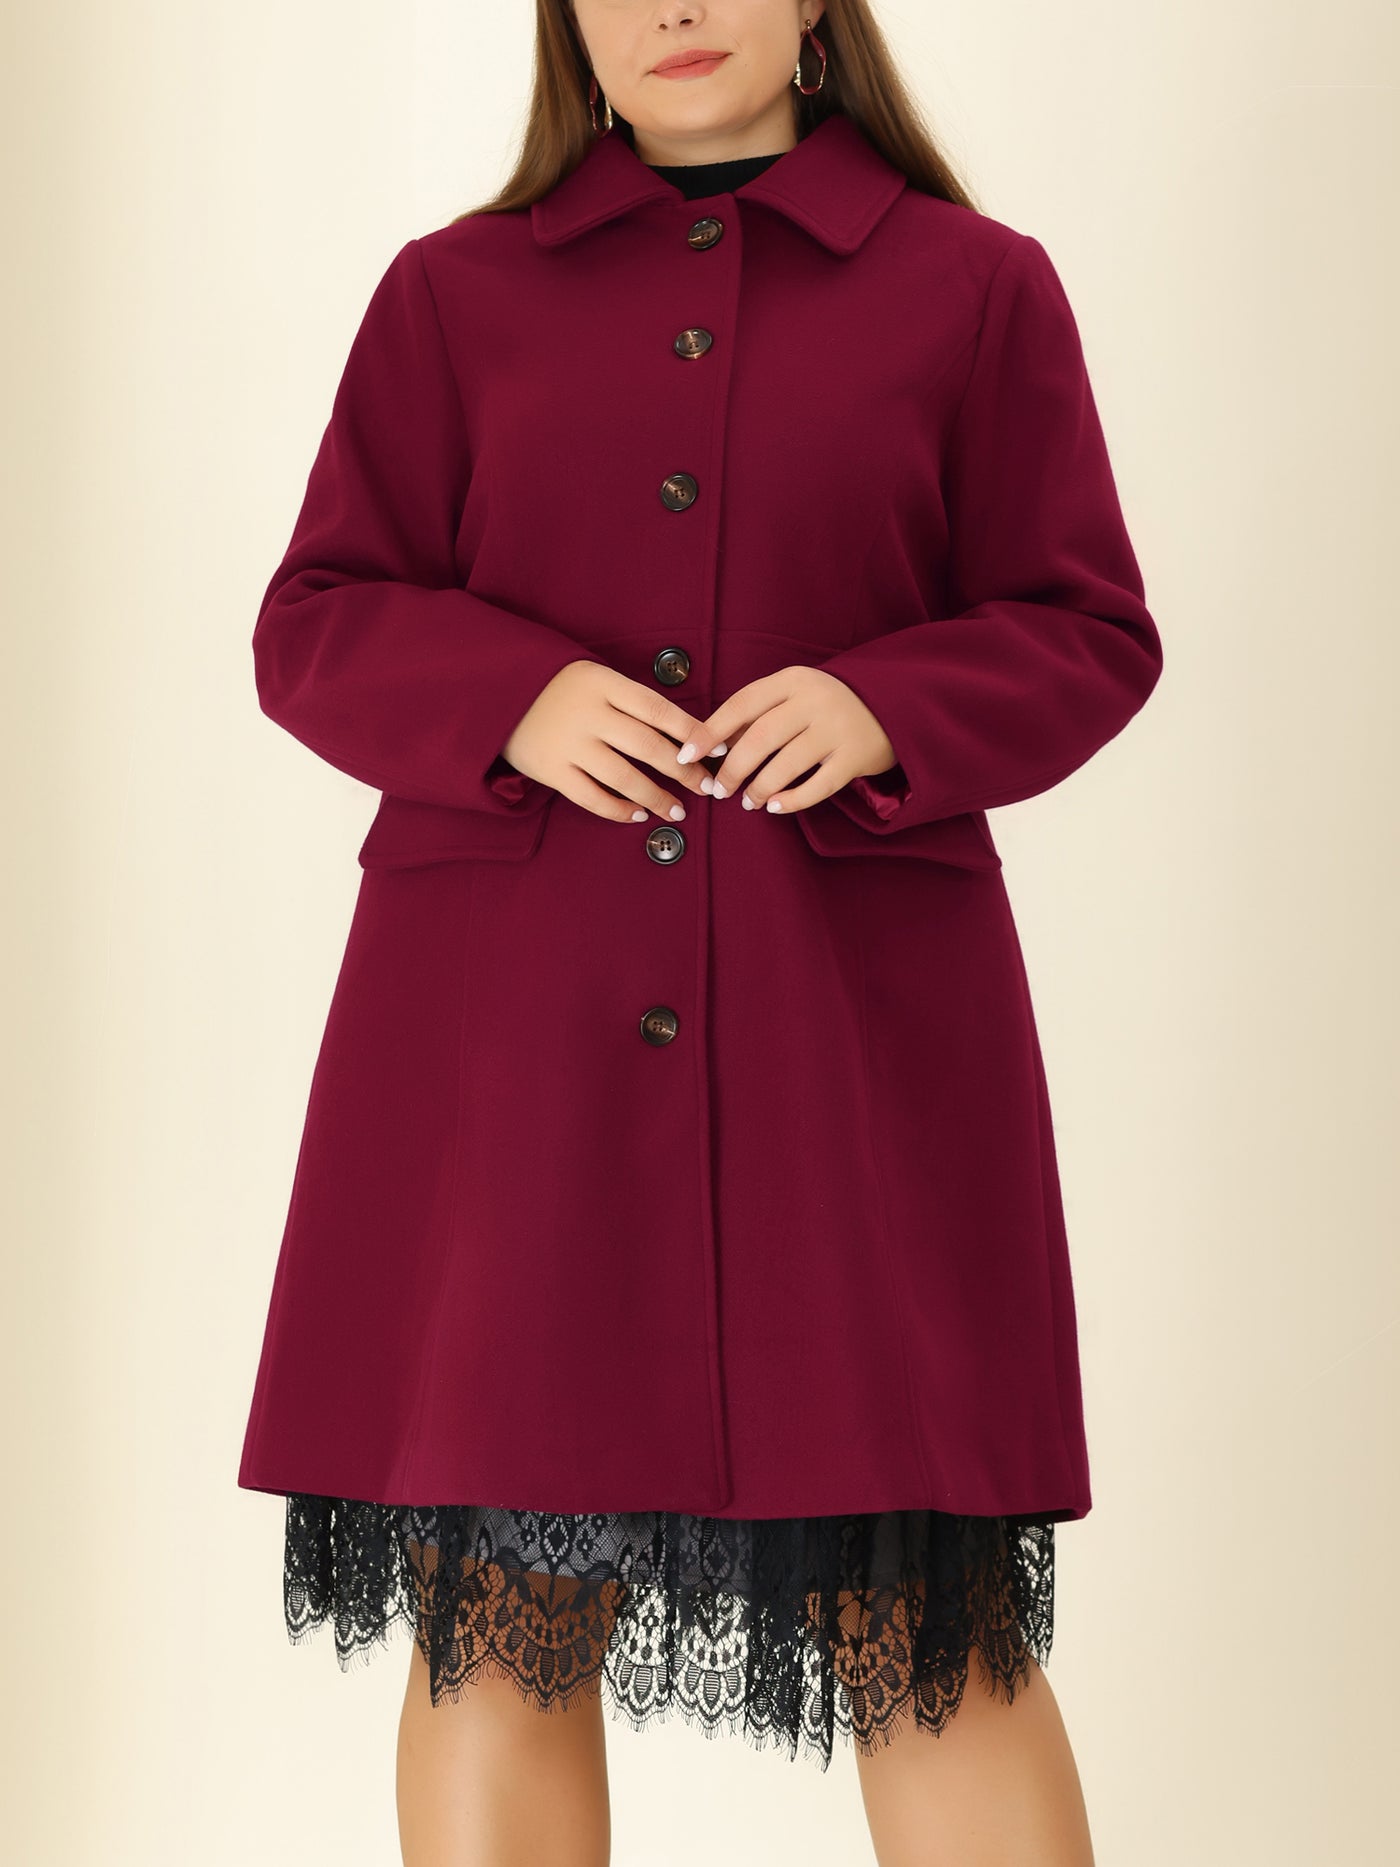 Bublédon Plus Size Coats Contrast Collar Single Breasted Long Coat